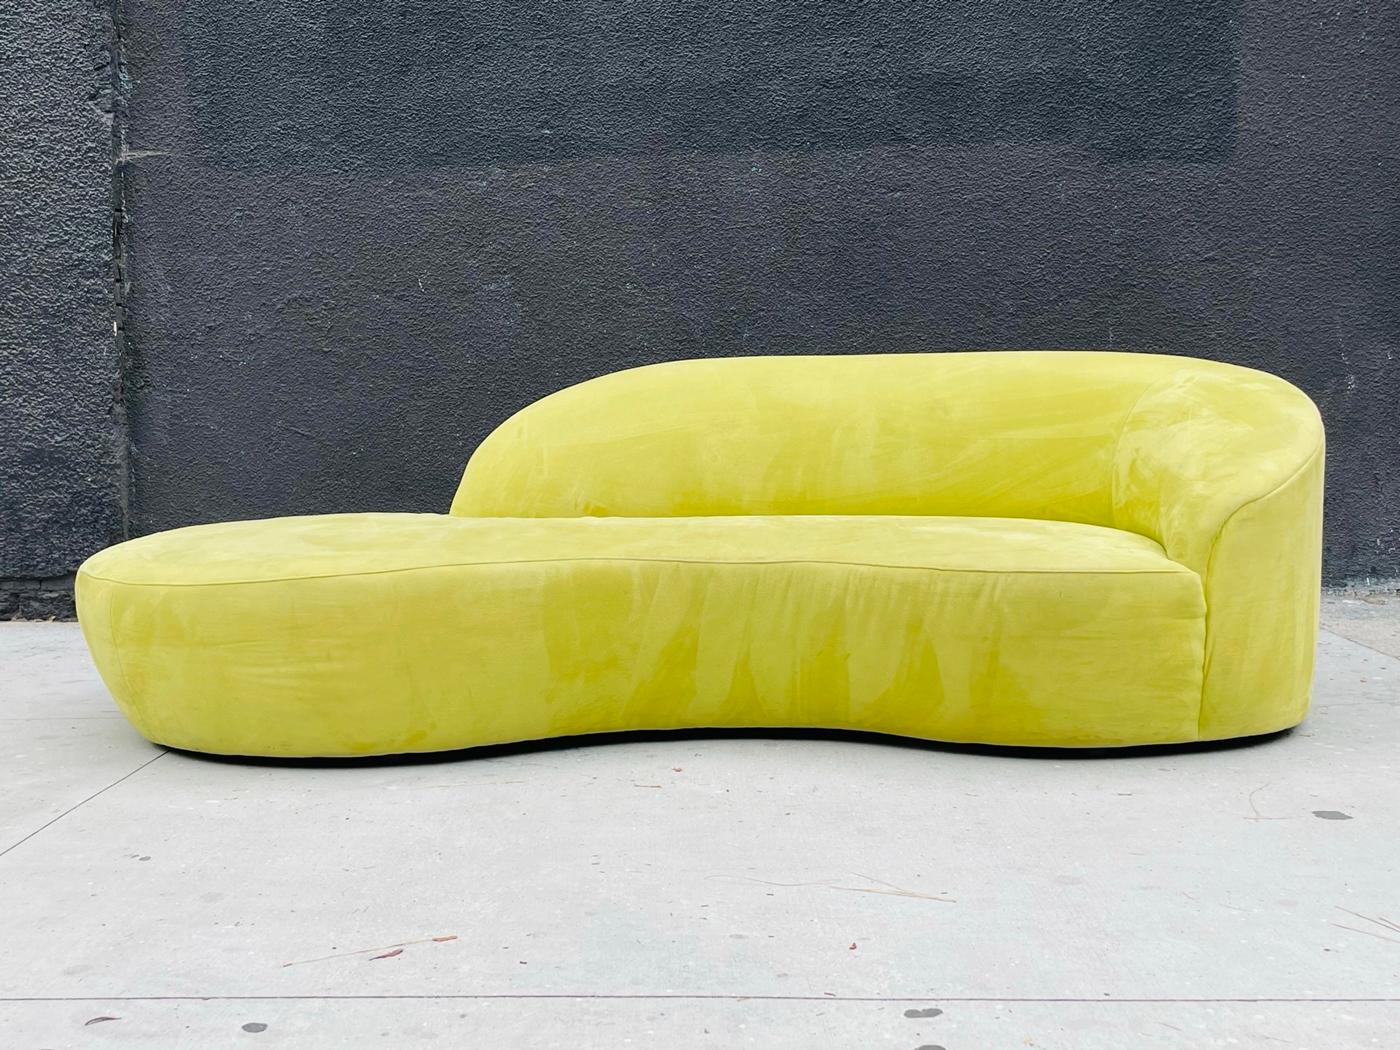 Introducing the Serpentine Sofa in the Style of Vladimir Kagan, a stunning addition to any modern living space. This beautiful yellow couch is a true statement piece, designed with timeless elegance and contemporary flair, the Serpentine Sofa is